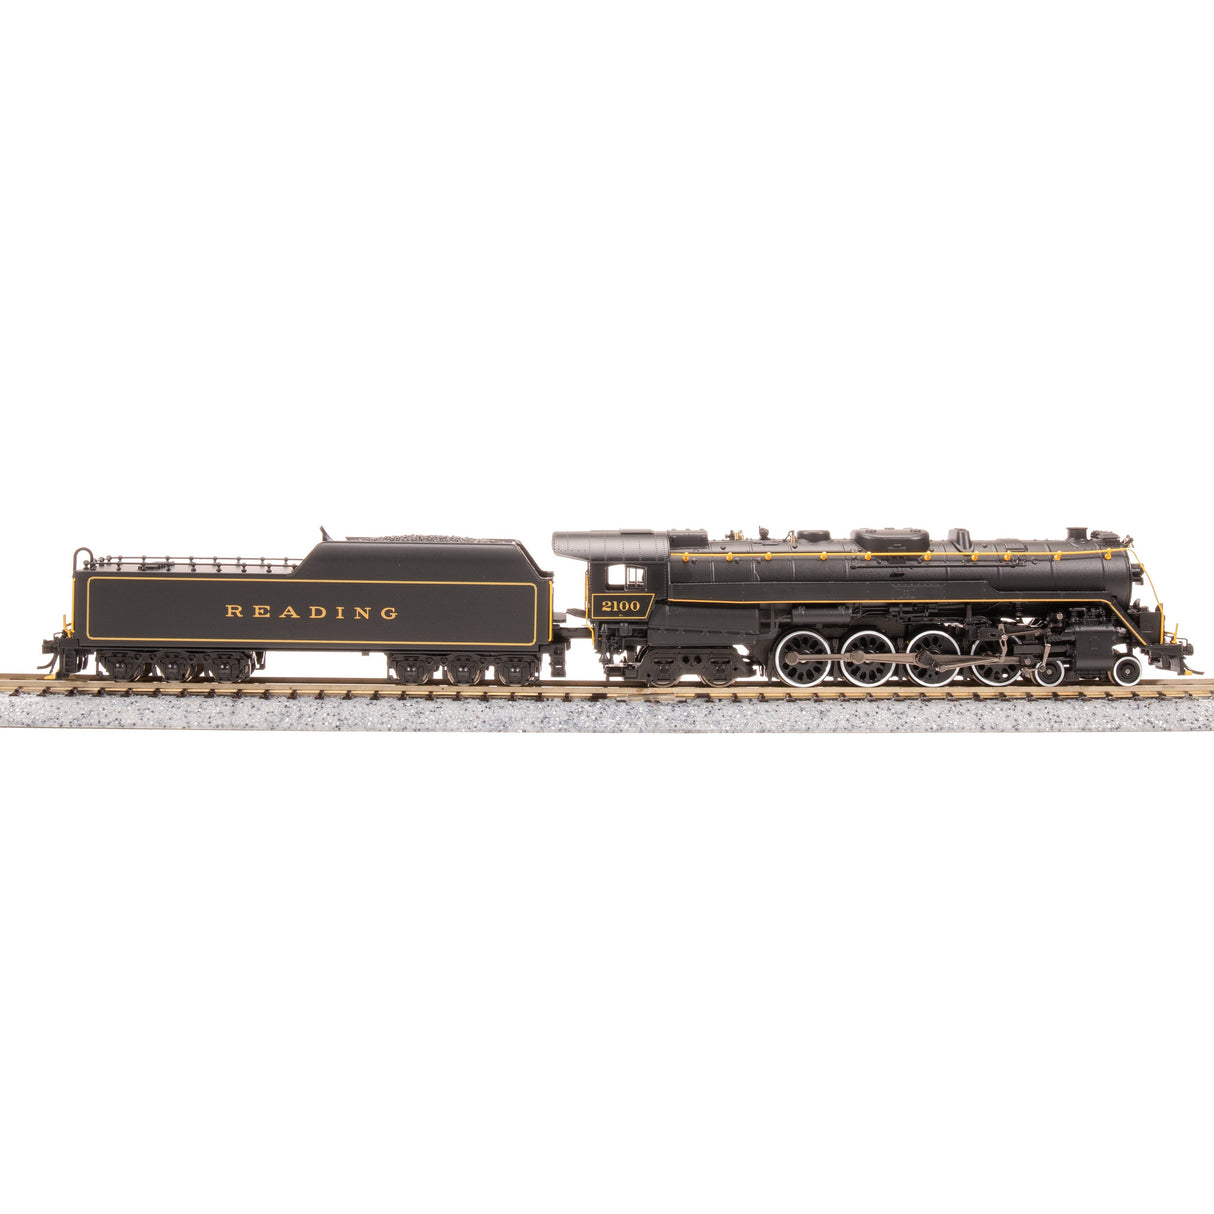 Broadway Limited N Scale Reading T-1 4-8-4 Steam Locomotive #2100/Excursion DC/DCC Sound